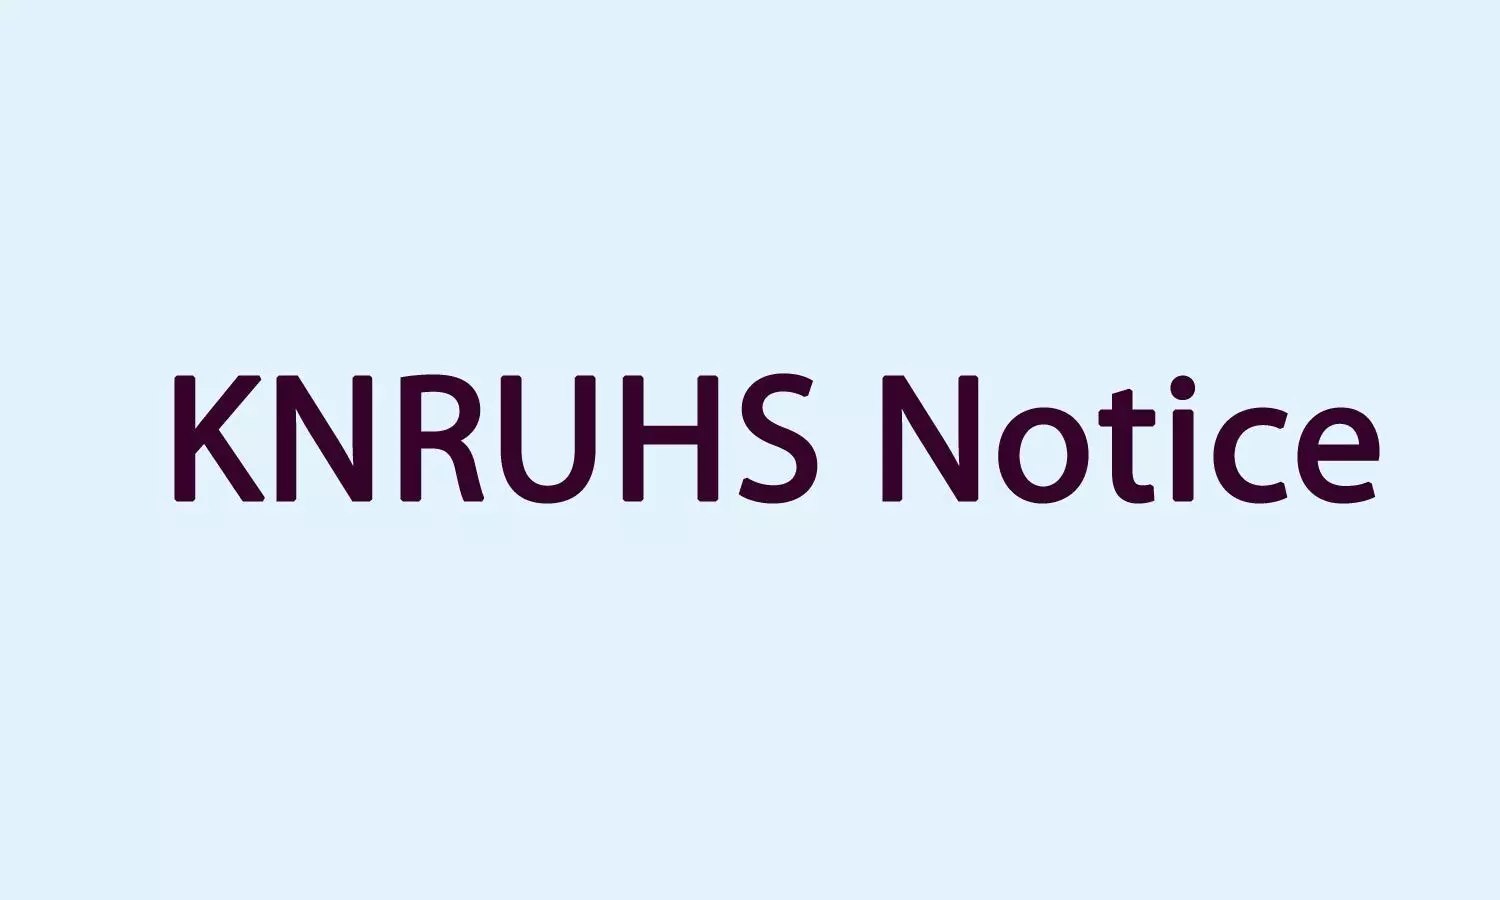 BSc Nursing admissions: KNRUHS issues notice on exercising web options for Final Phase of online counselling